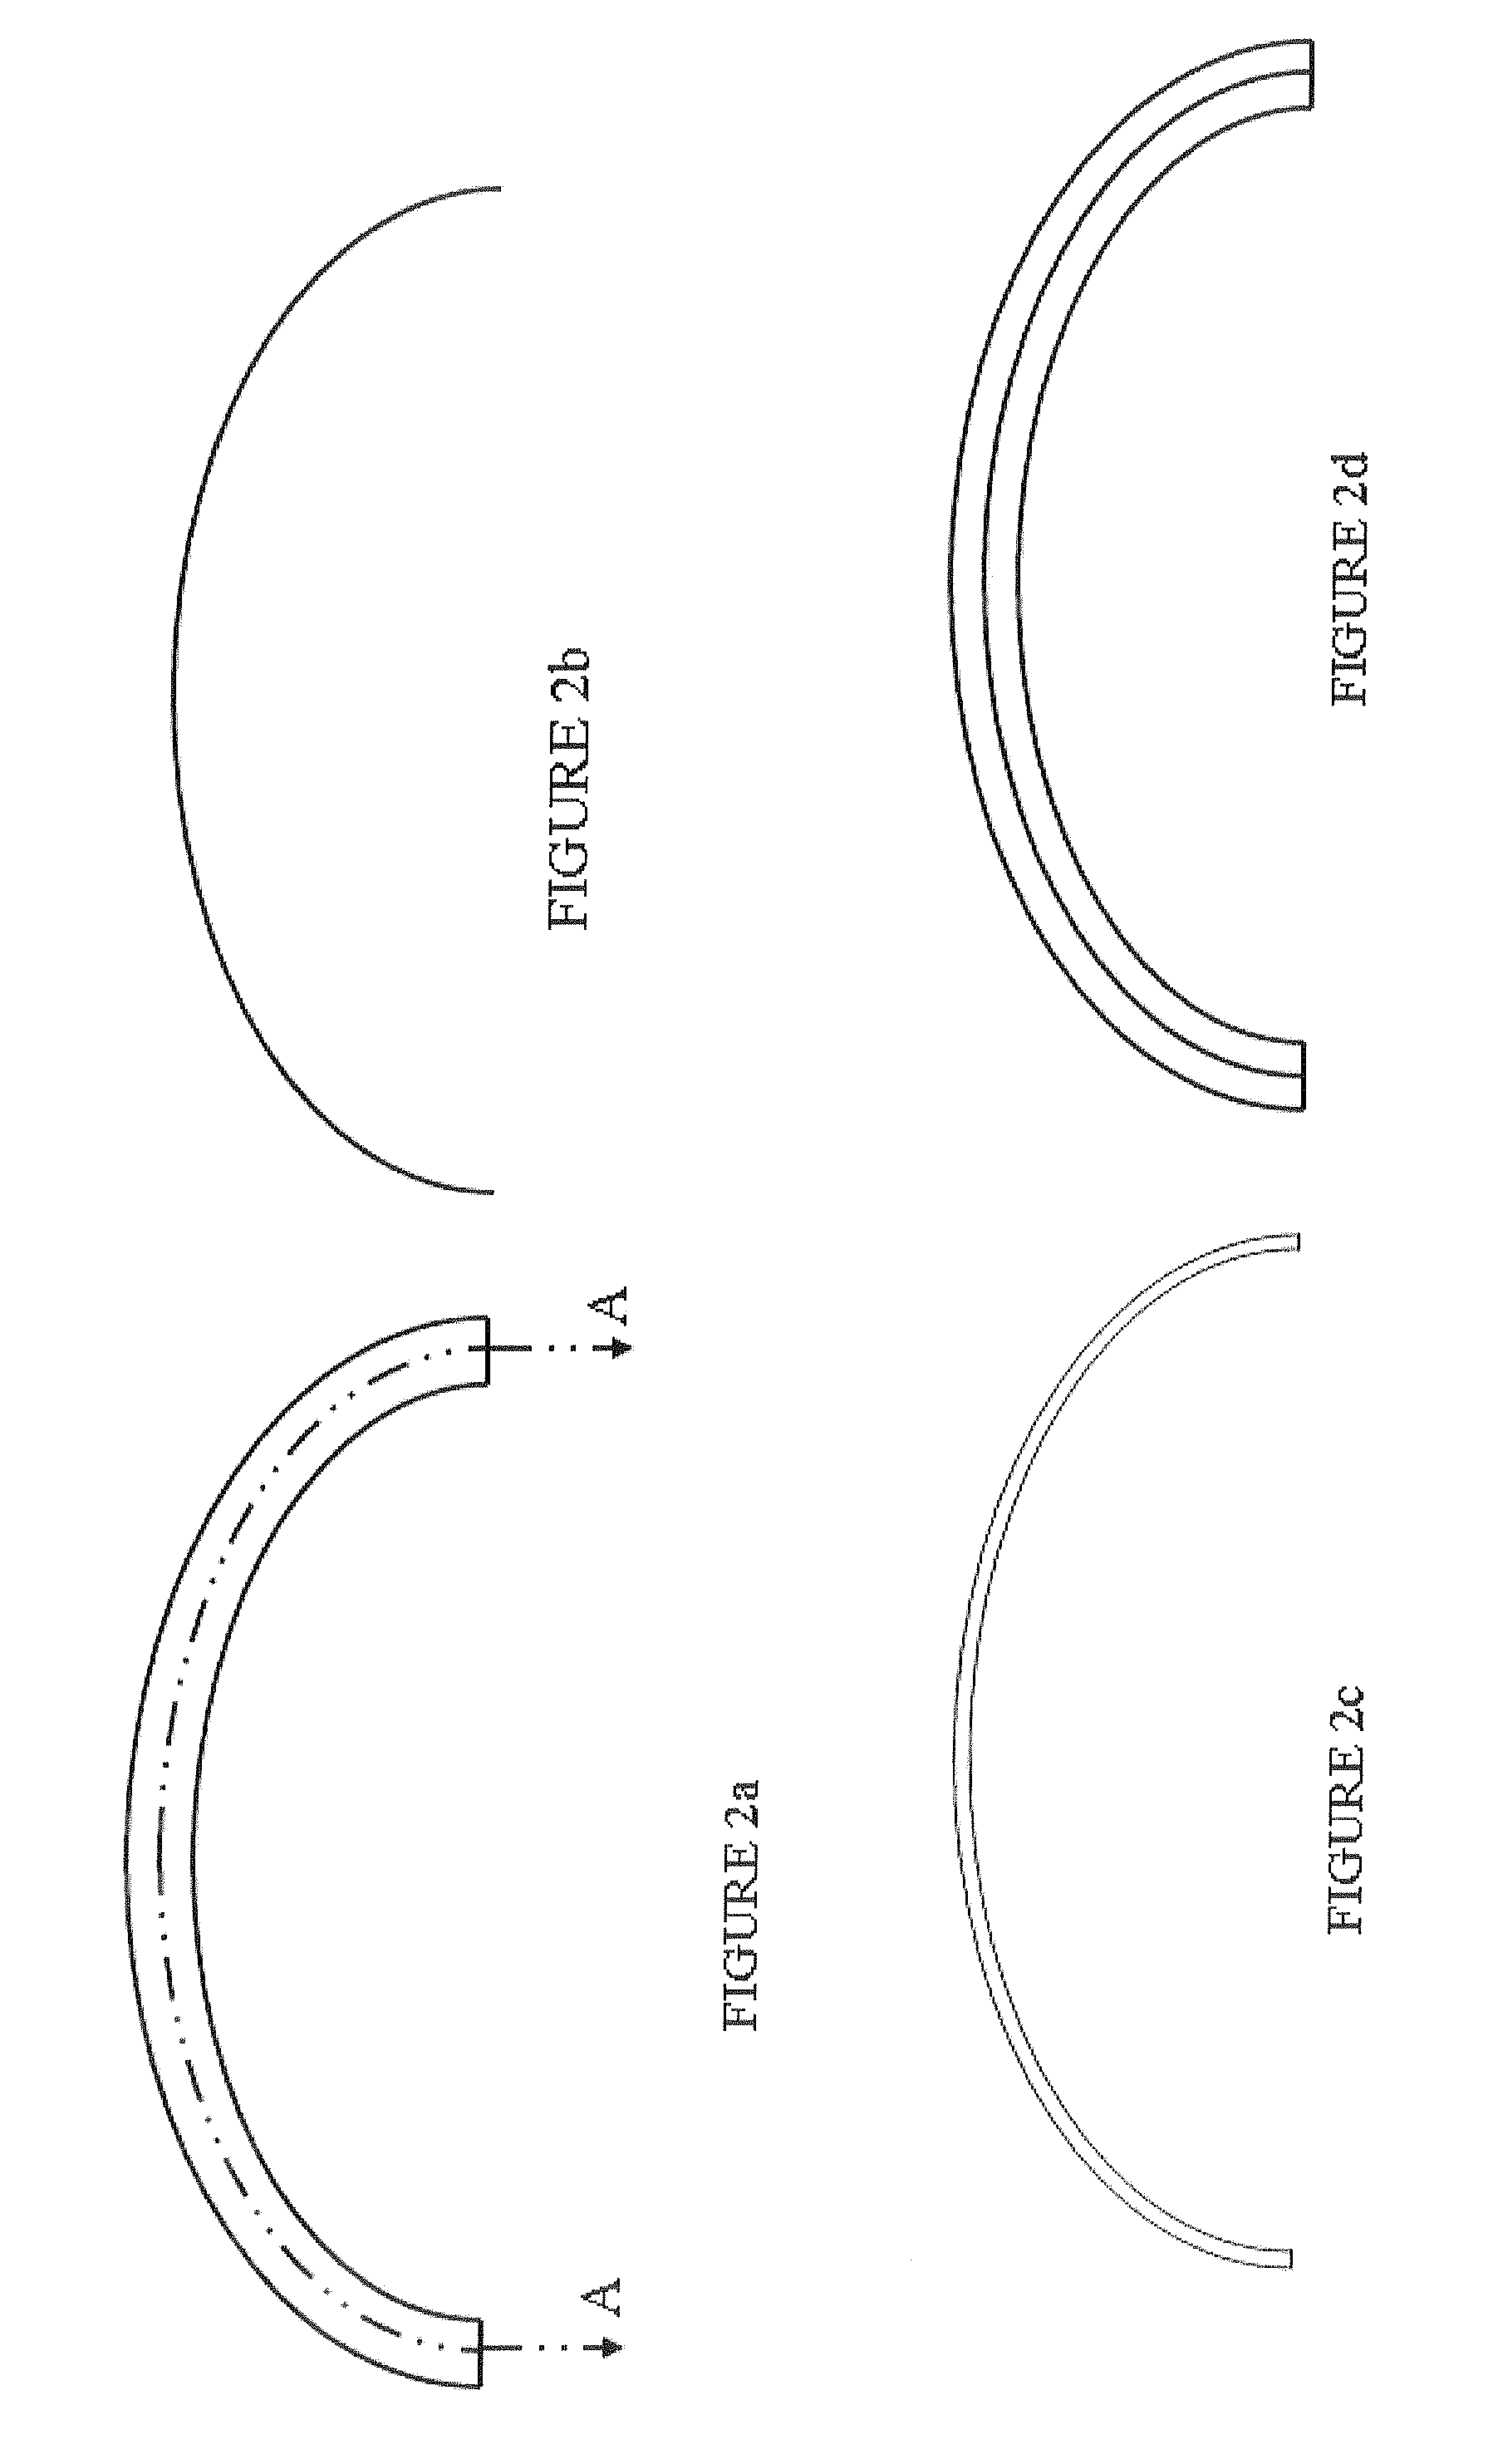 Method for Making Ophthalmic Devices Using Single Mold Stereolithography